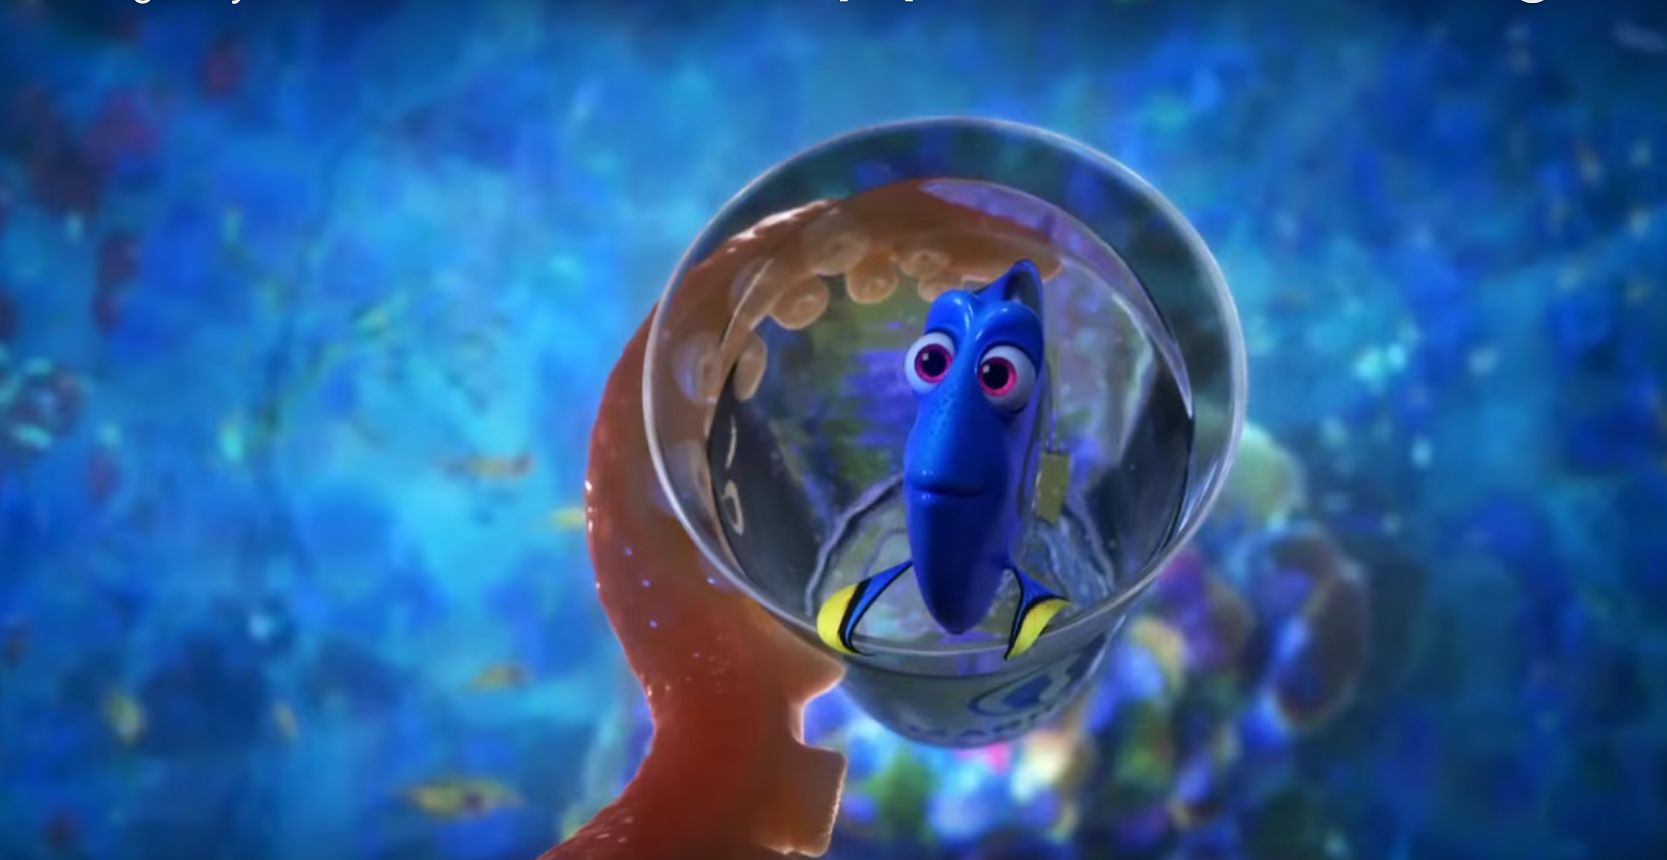 finding dory 2016 full movie free hd